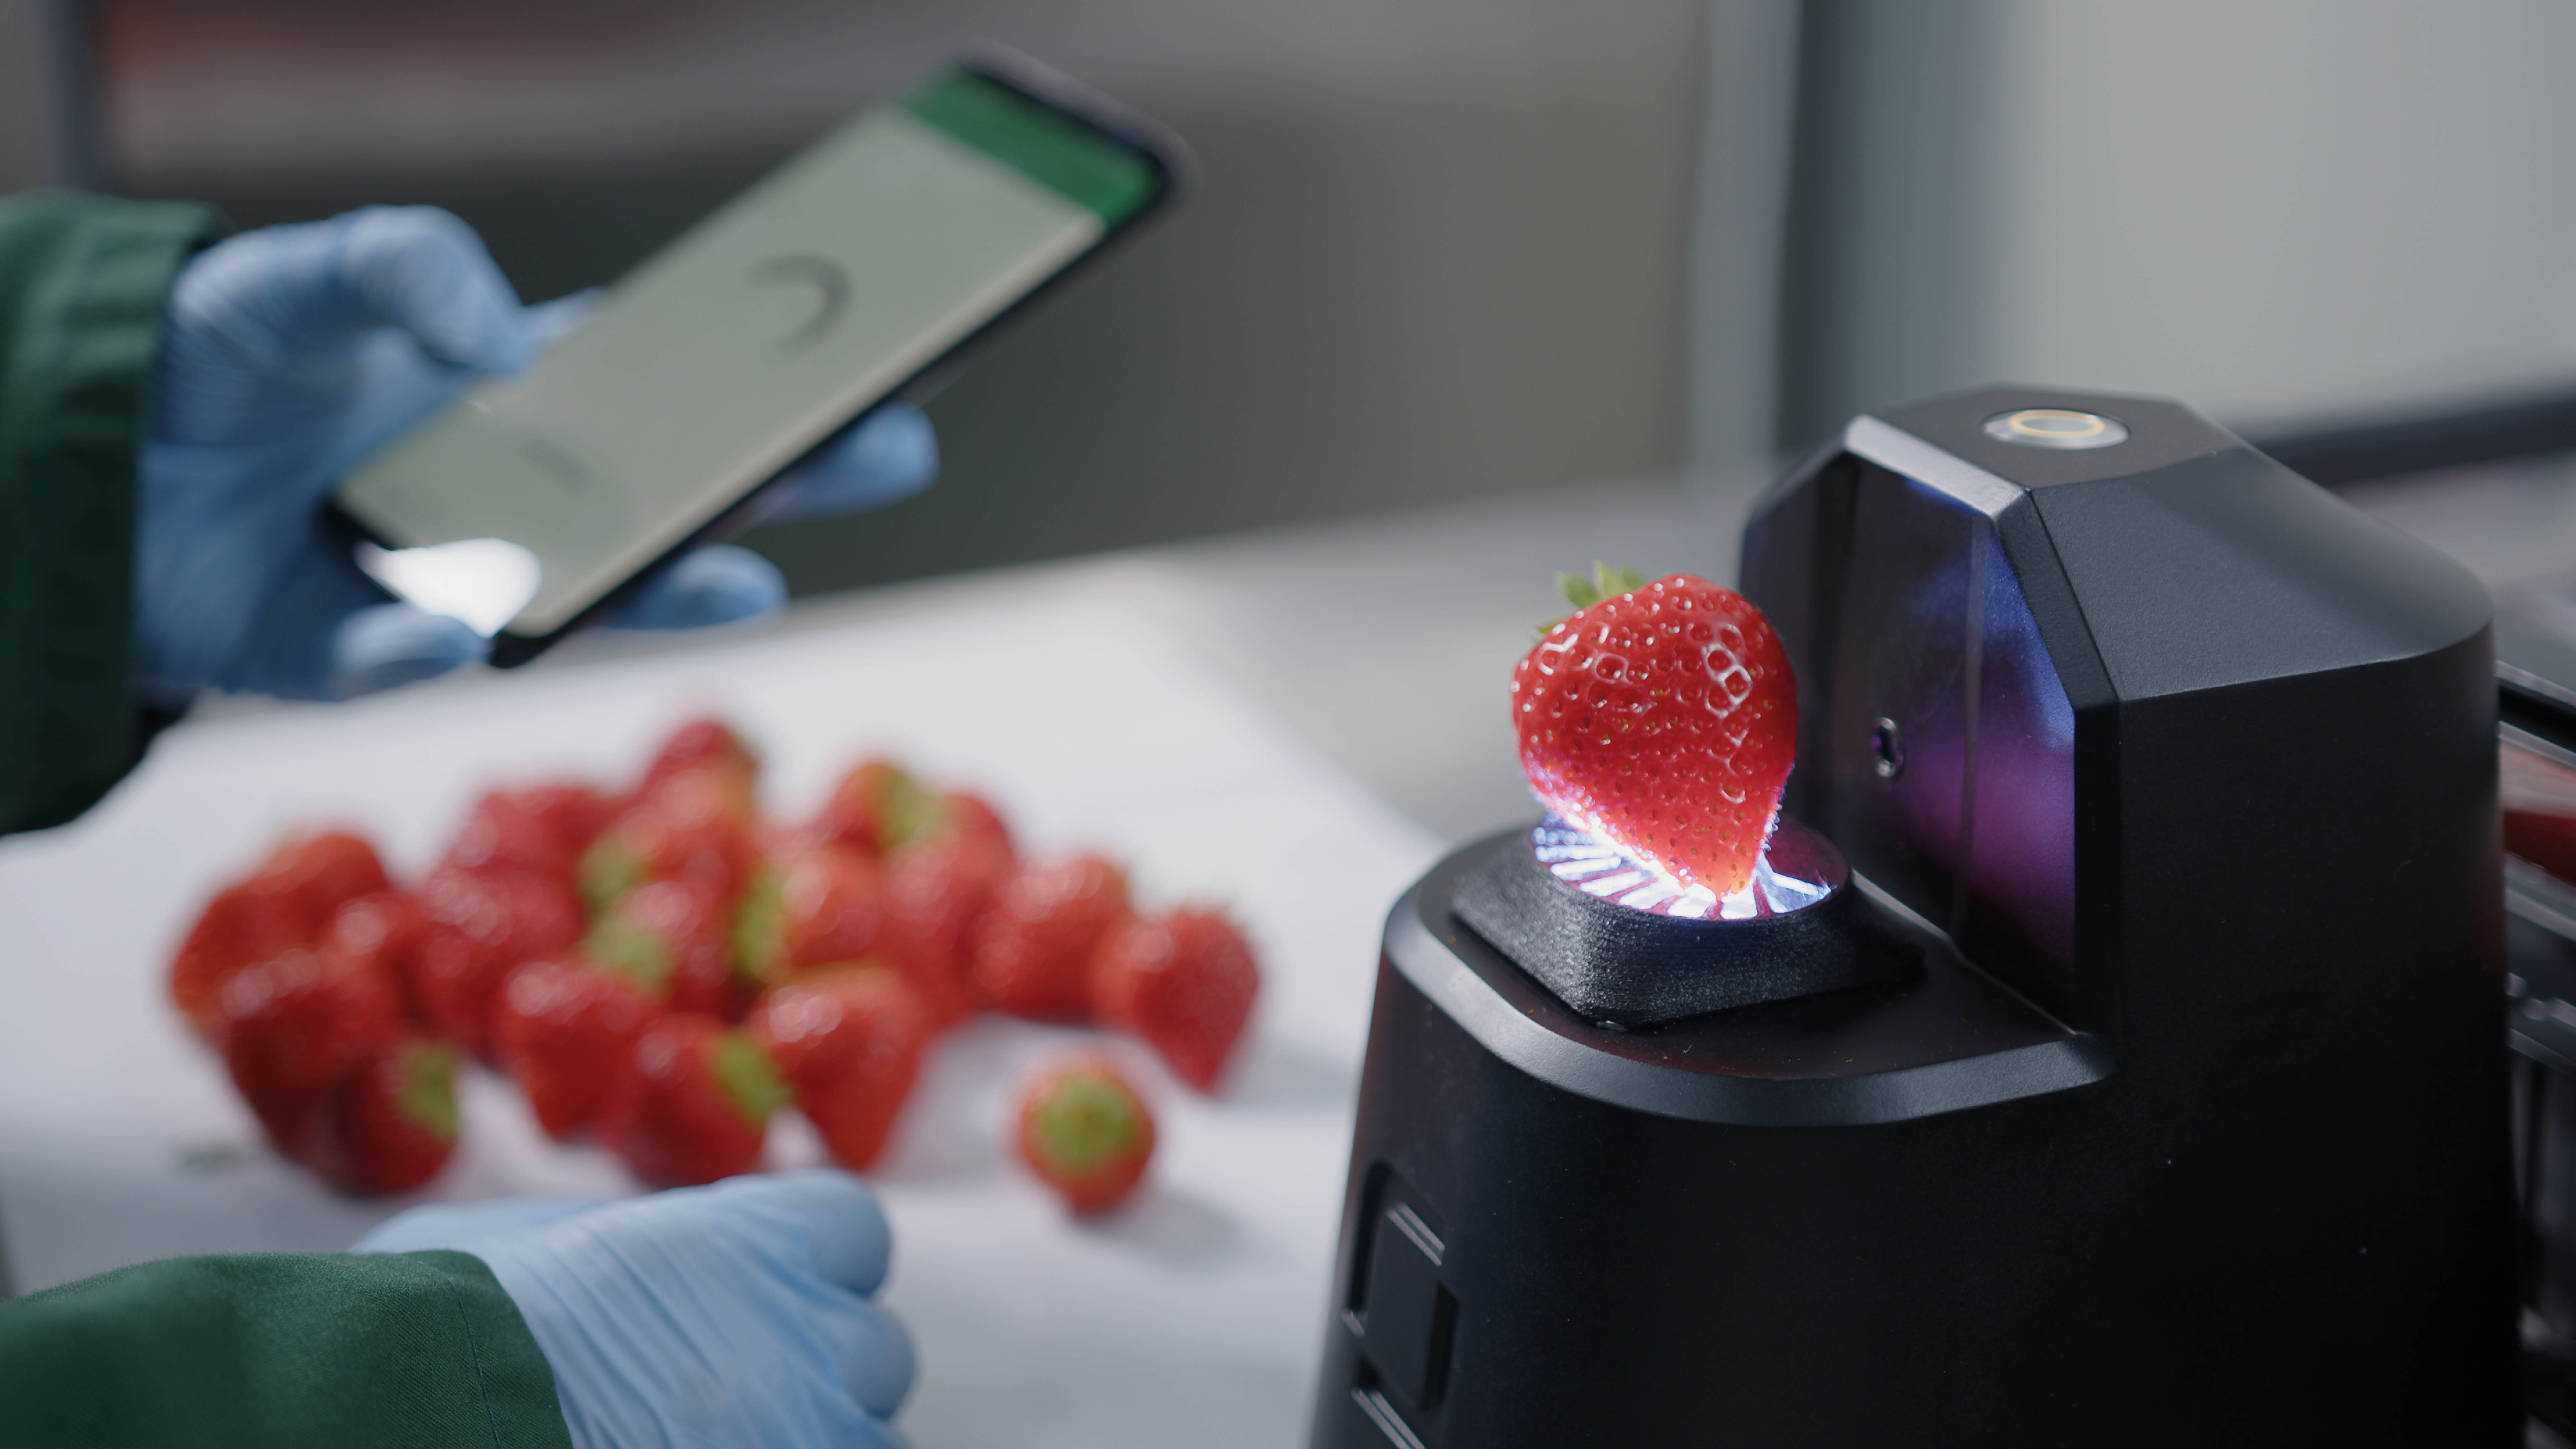 OneThird's AI-Powered Produce Scanners Put an End to Wasted Strawberries